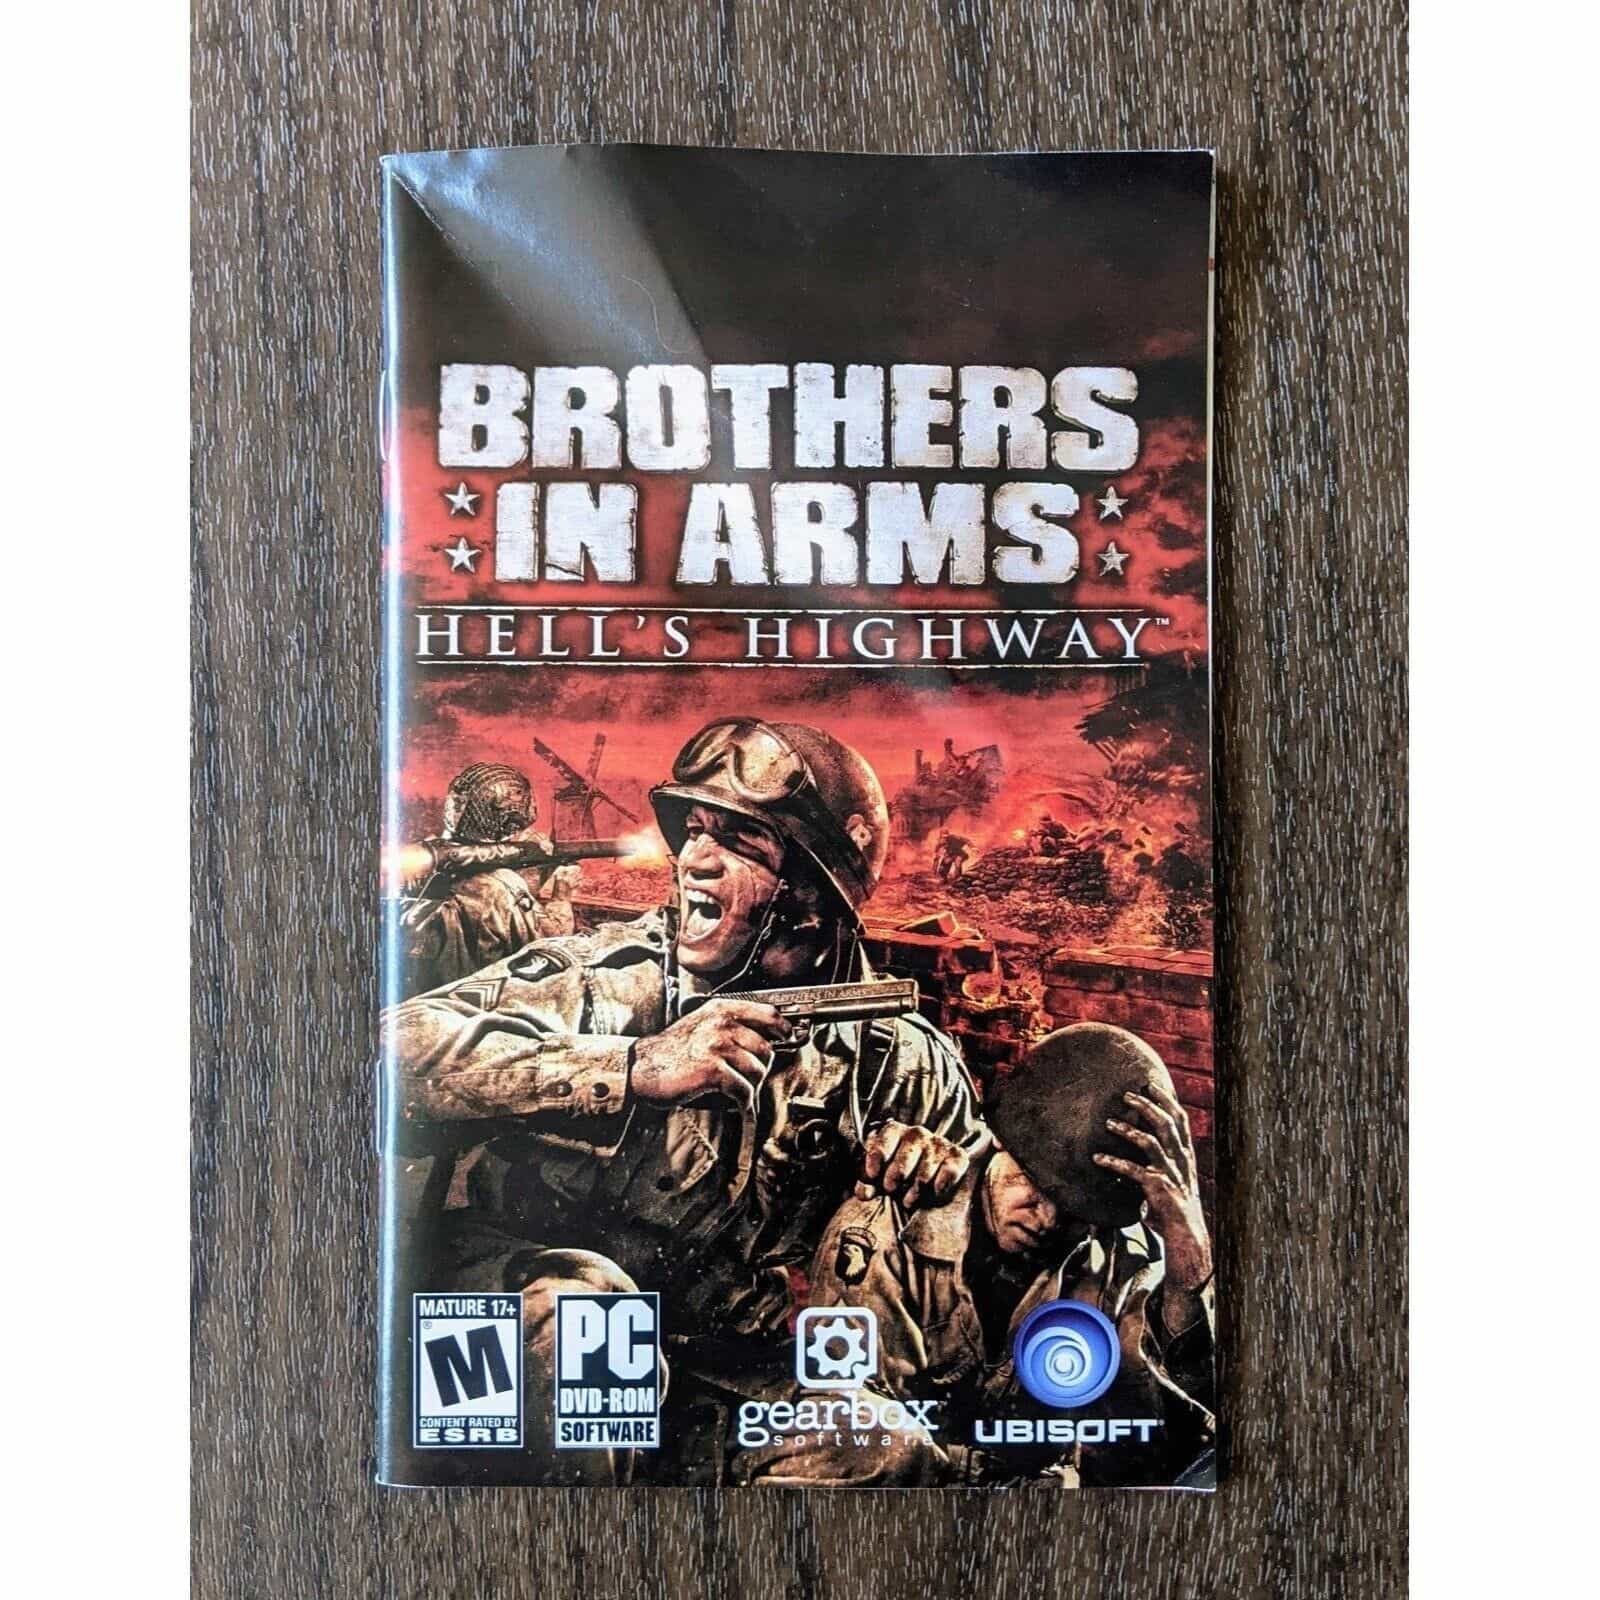 Brothers In Arms Game Manual for PC